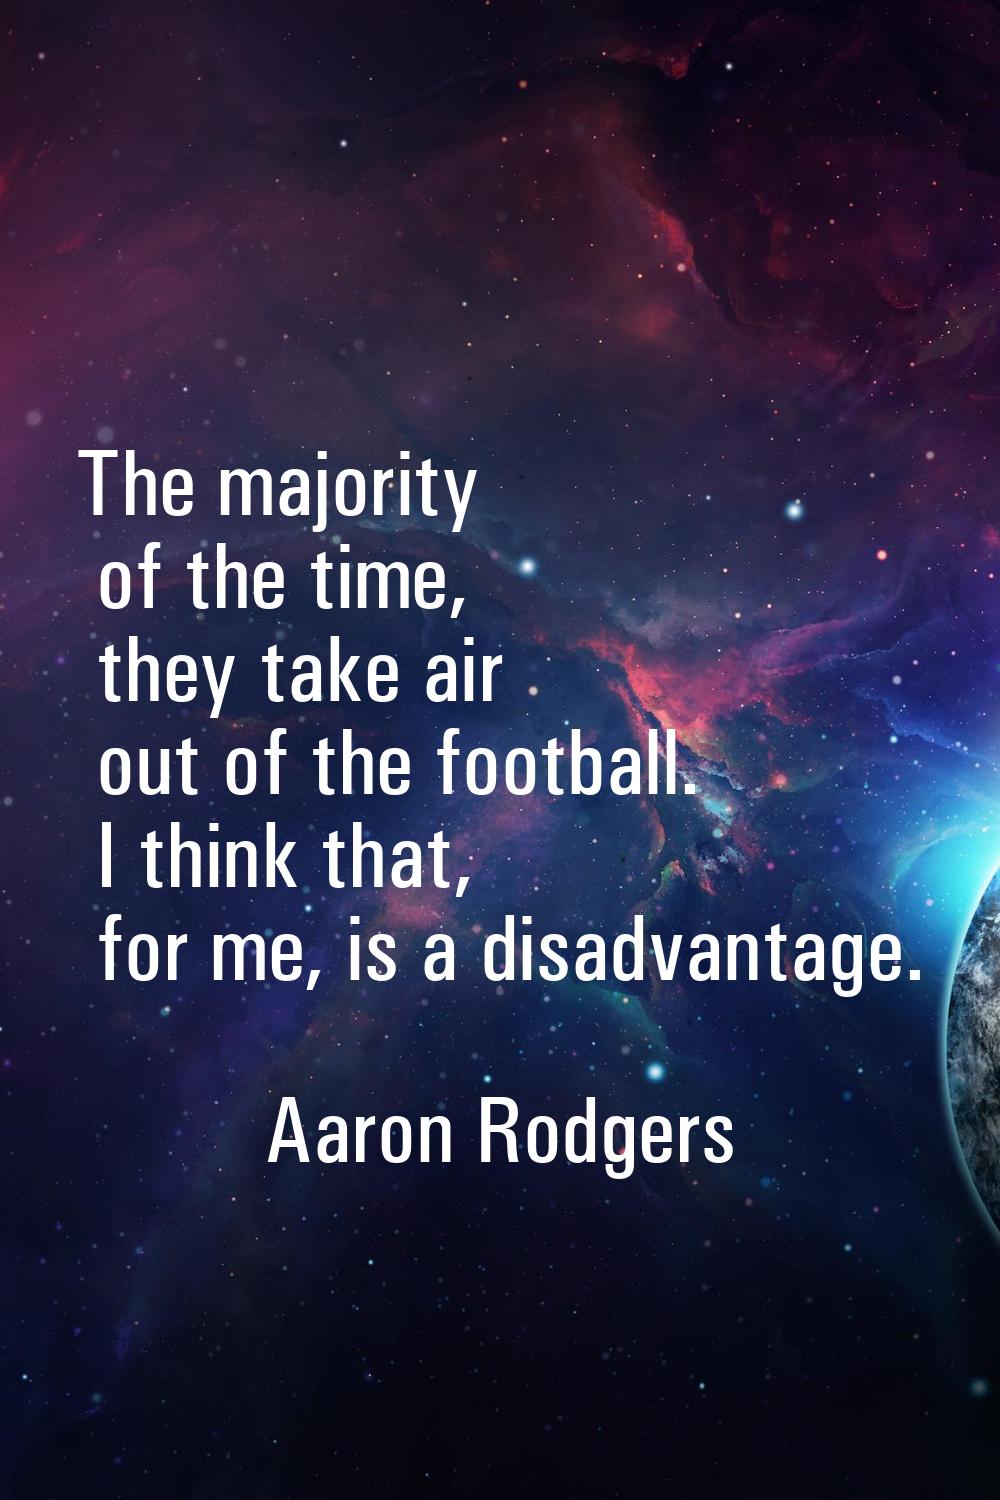 The majority of the time, they take air out of the football. I think that, for me, is a disadvantag